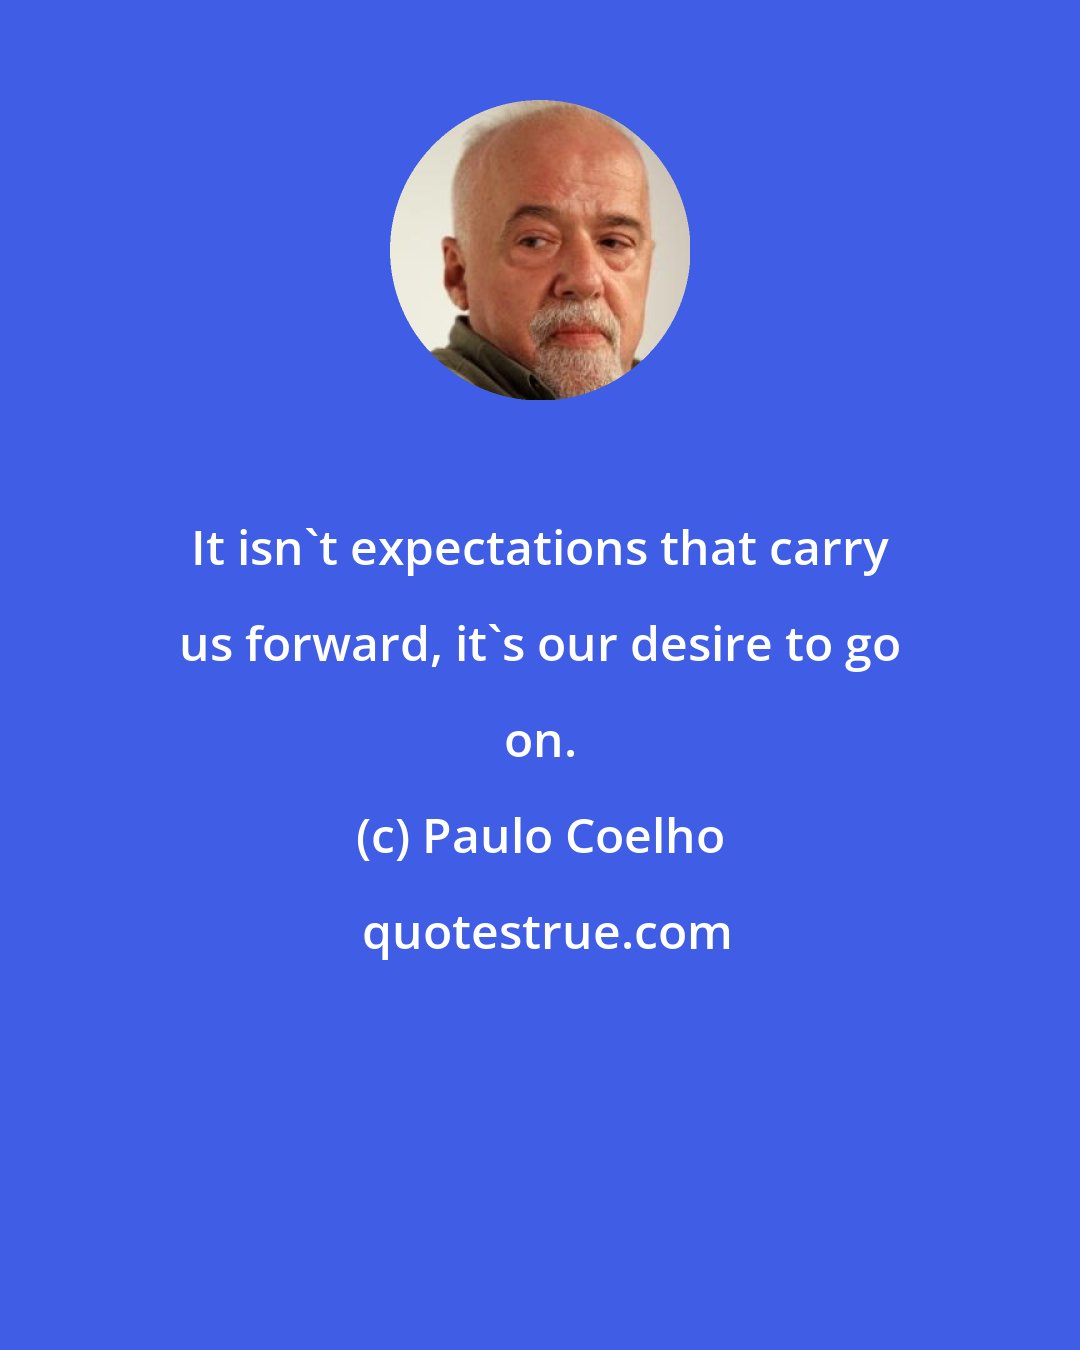 Paulo Coelho: It isn't expectations that carry us forward, it's our desire to go on.